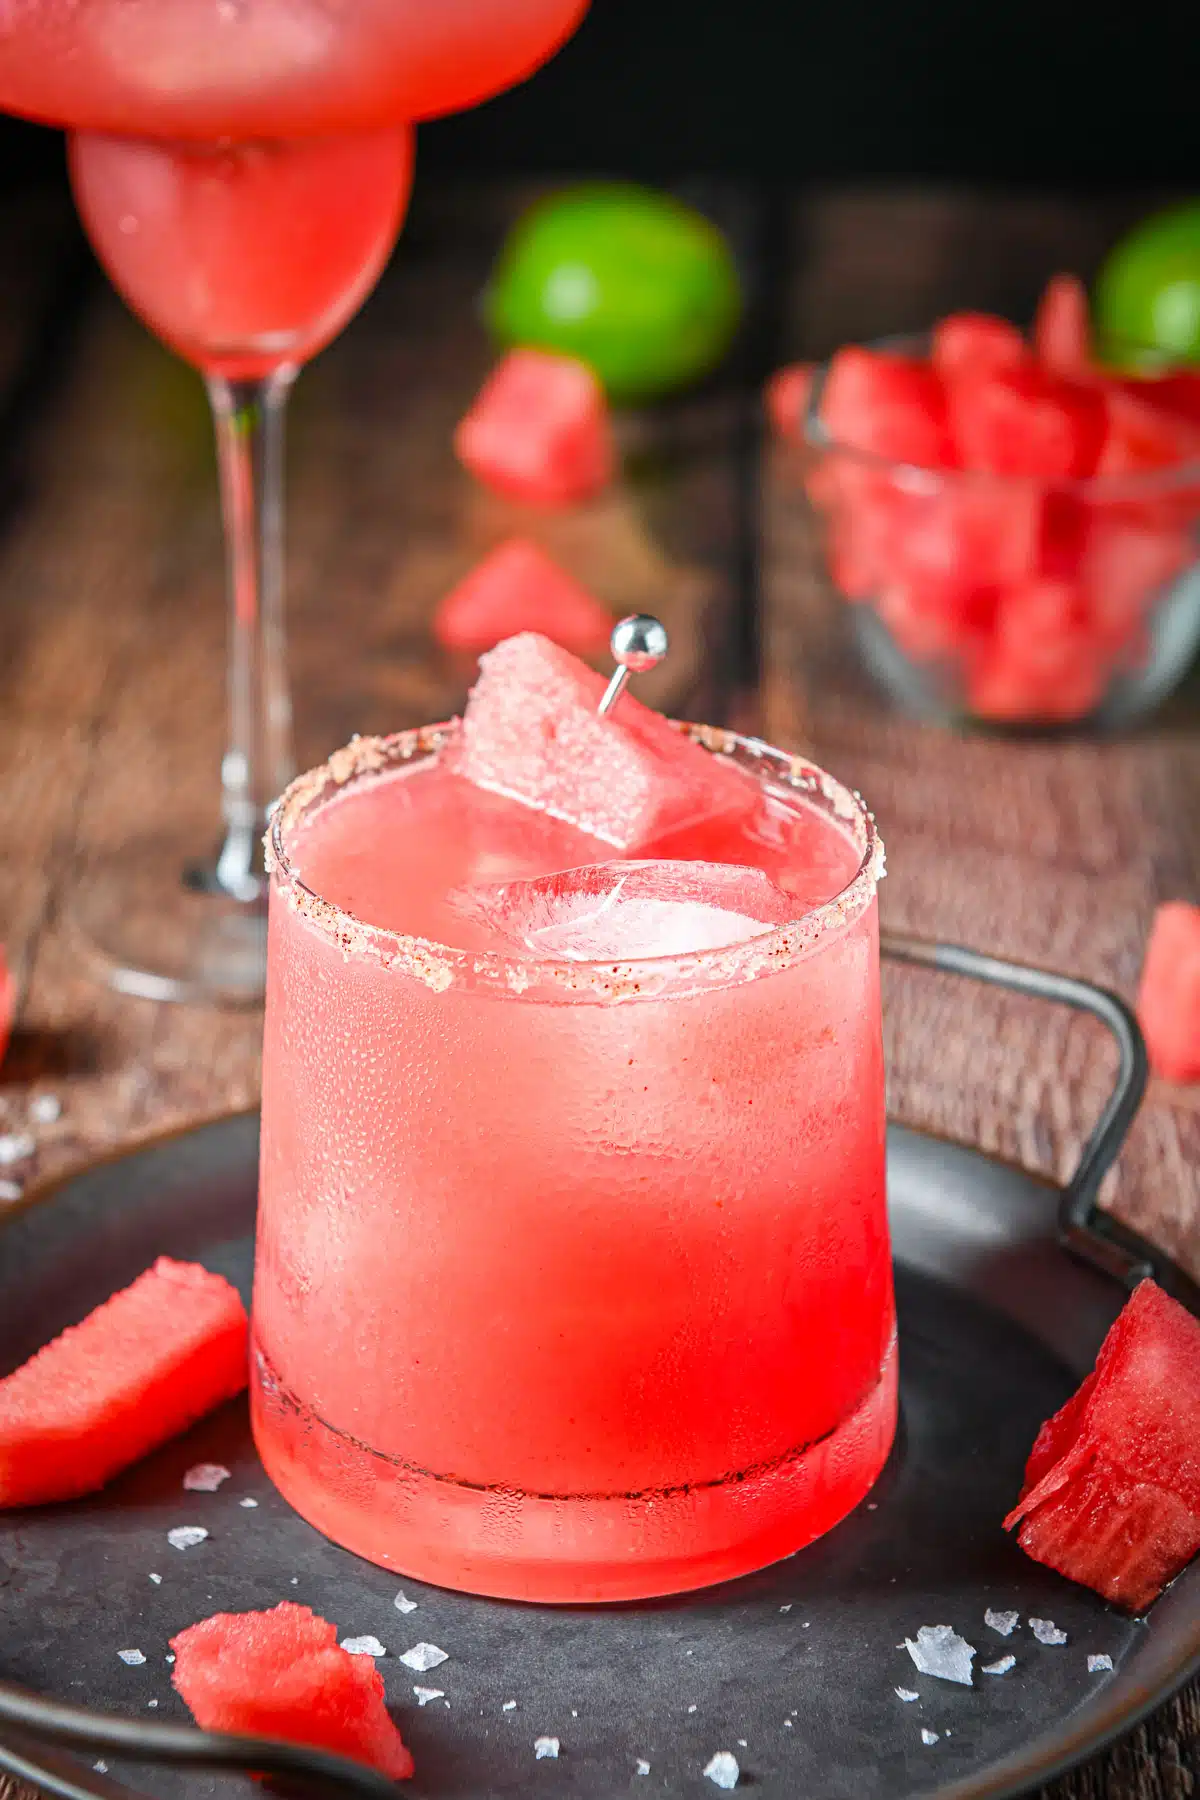 The short salted glass with the margarita in it with watermelon as garnish